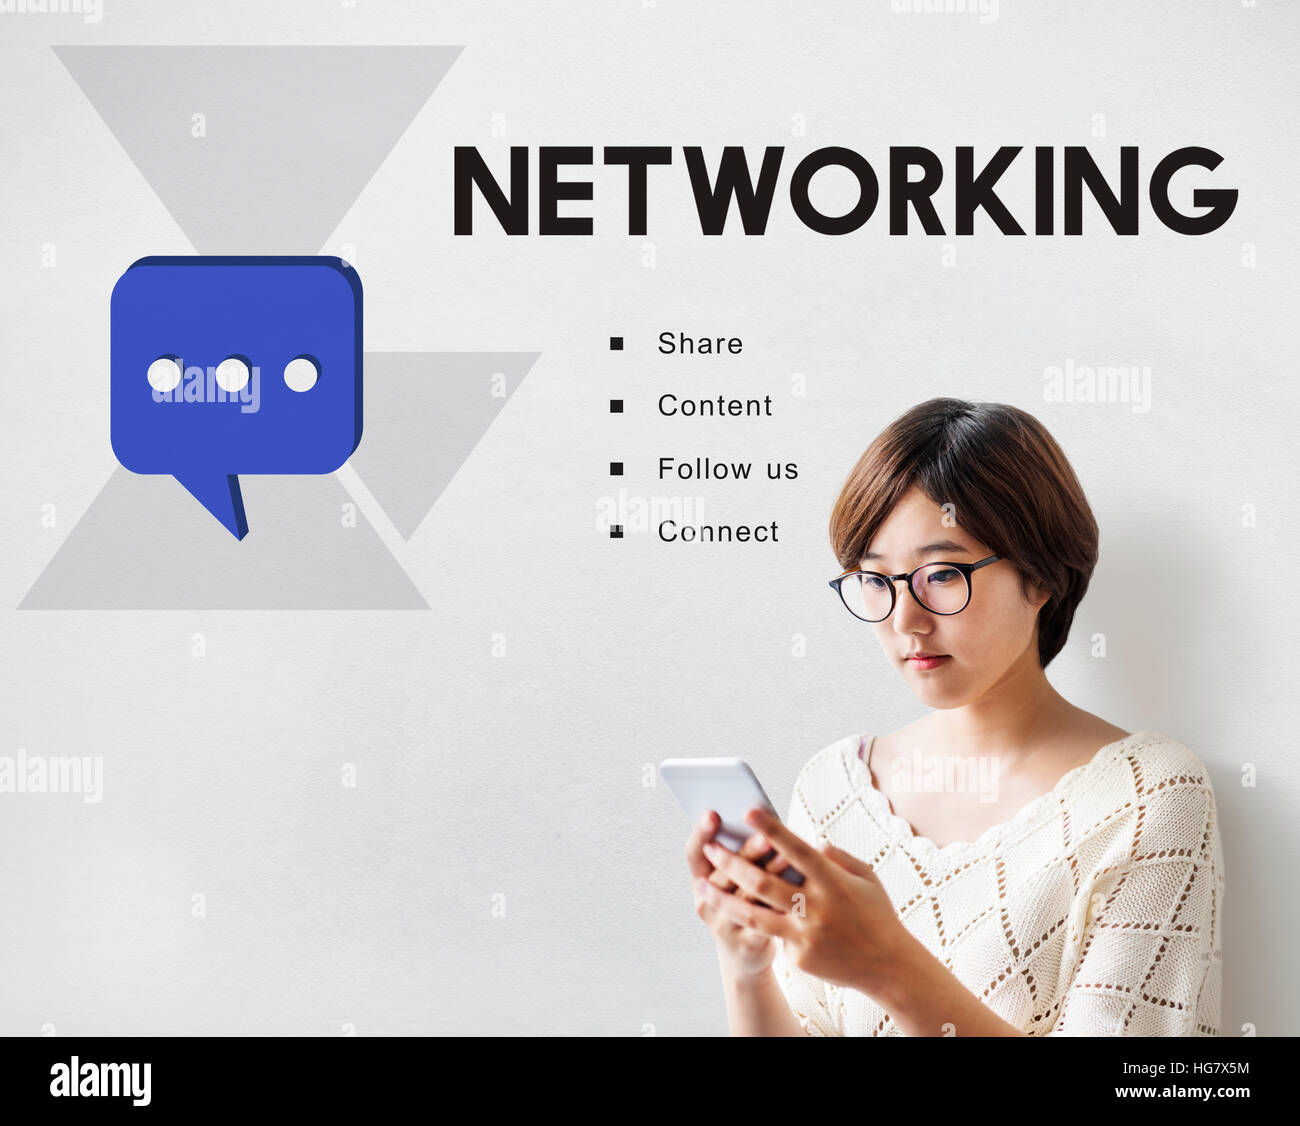 Social Network Communication Connection Concept Stock Photo